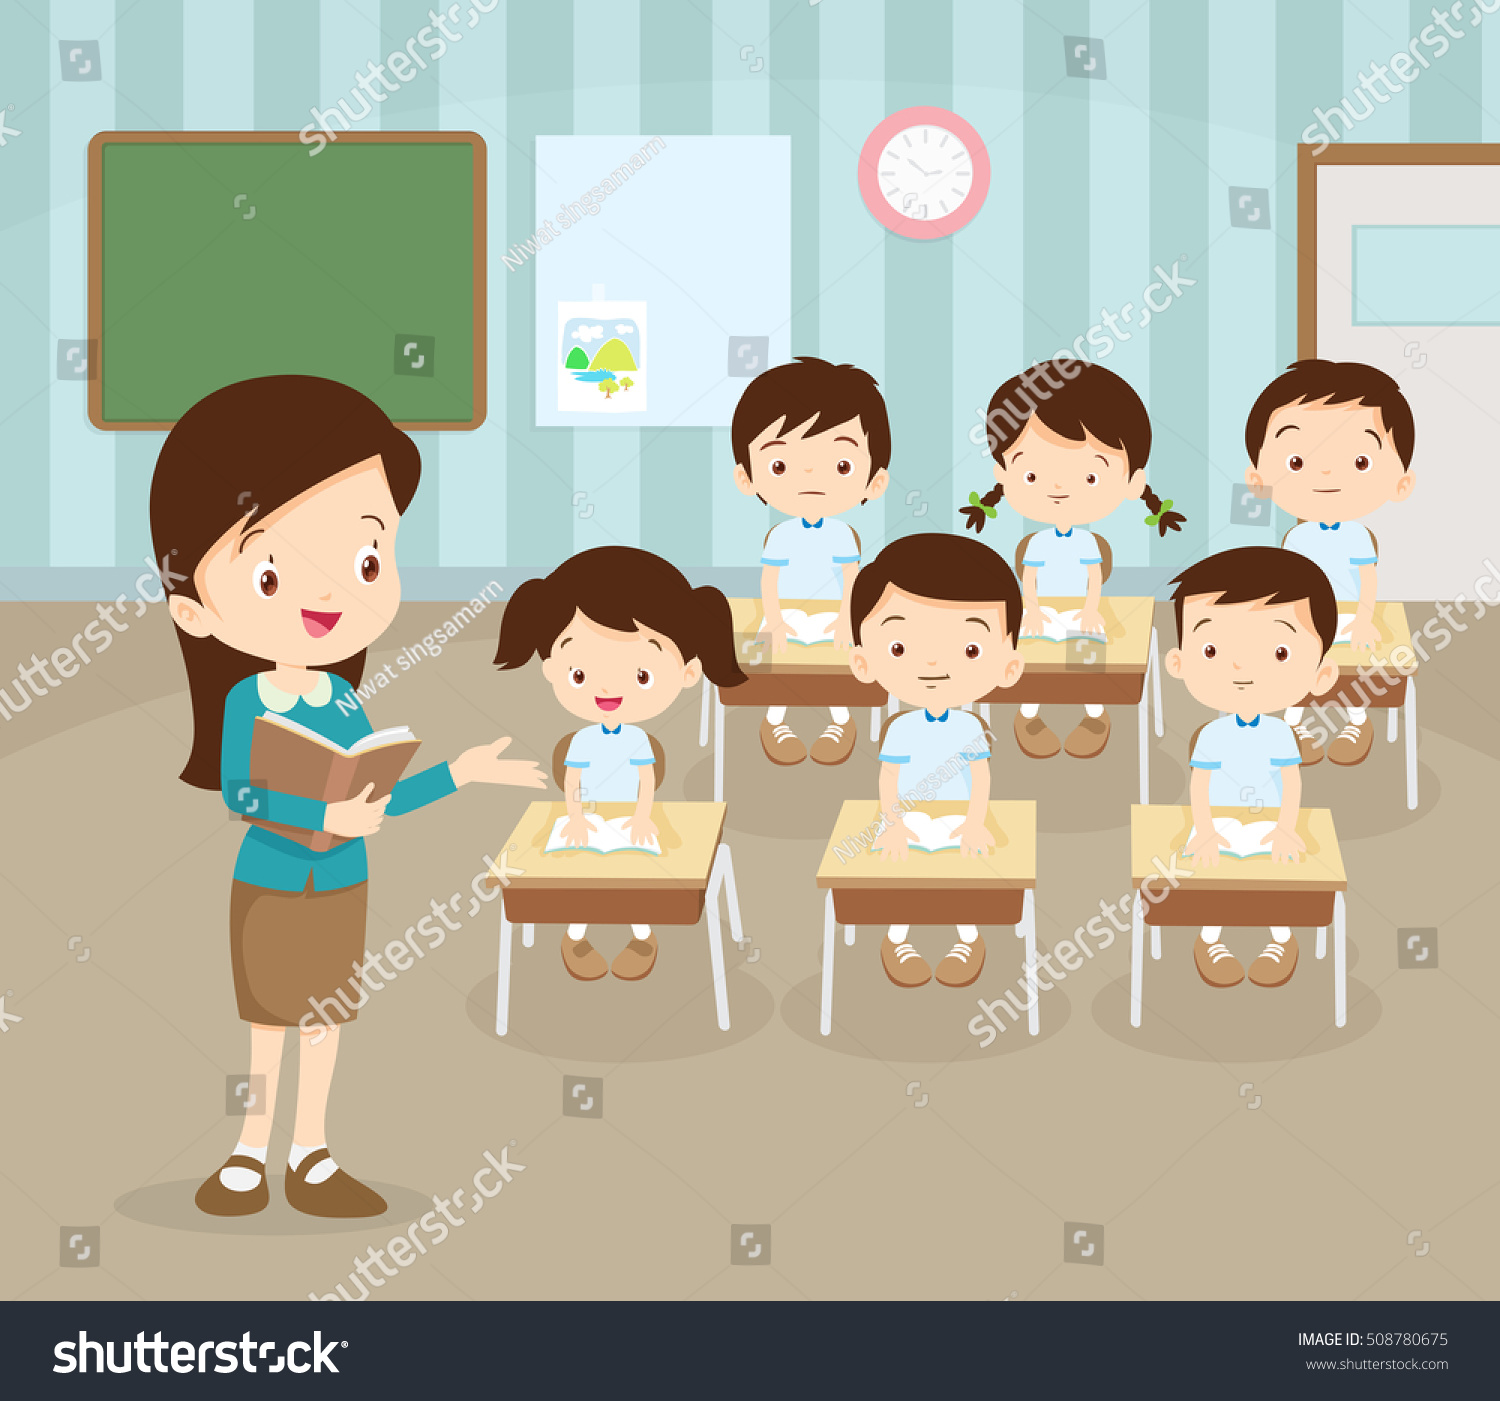 clipart pupils in class - photo #50